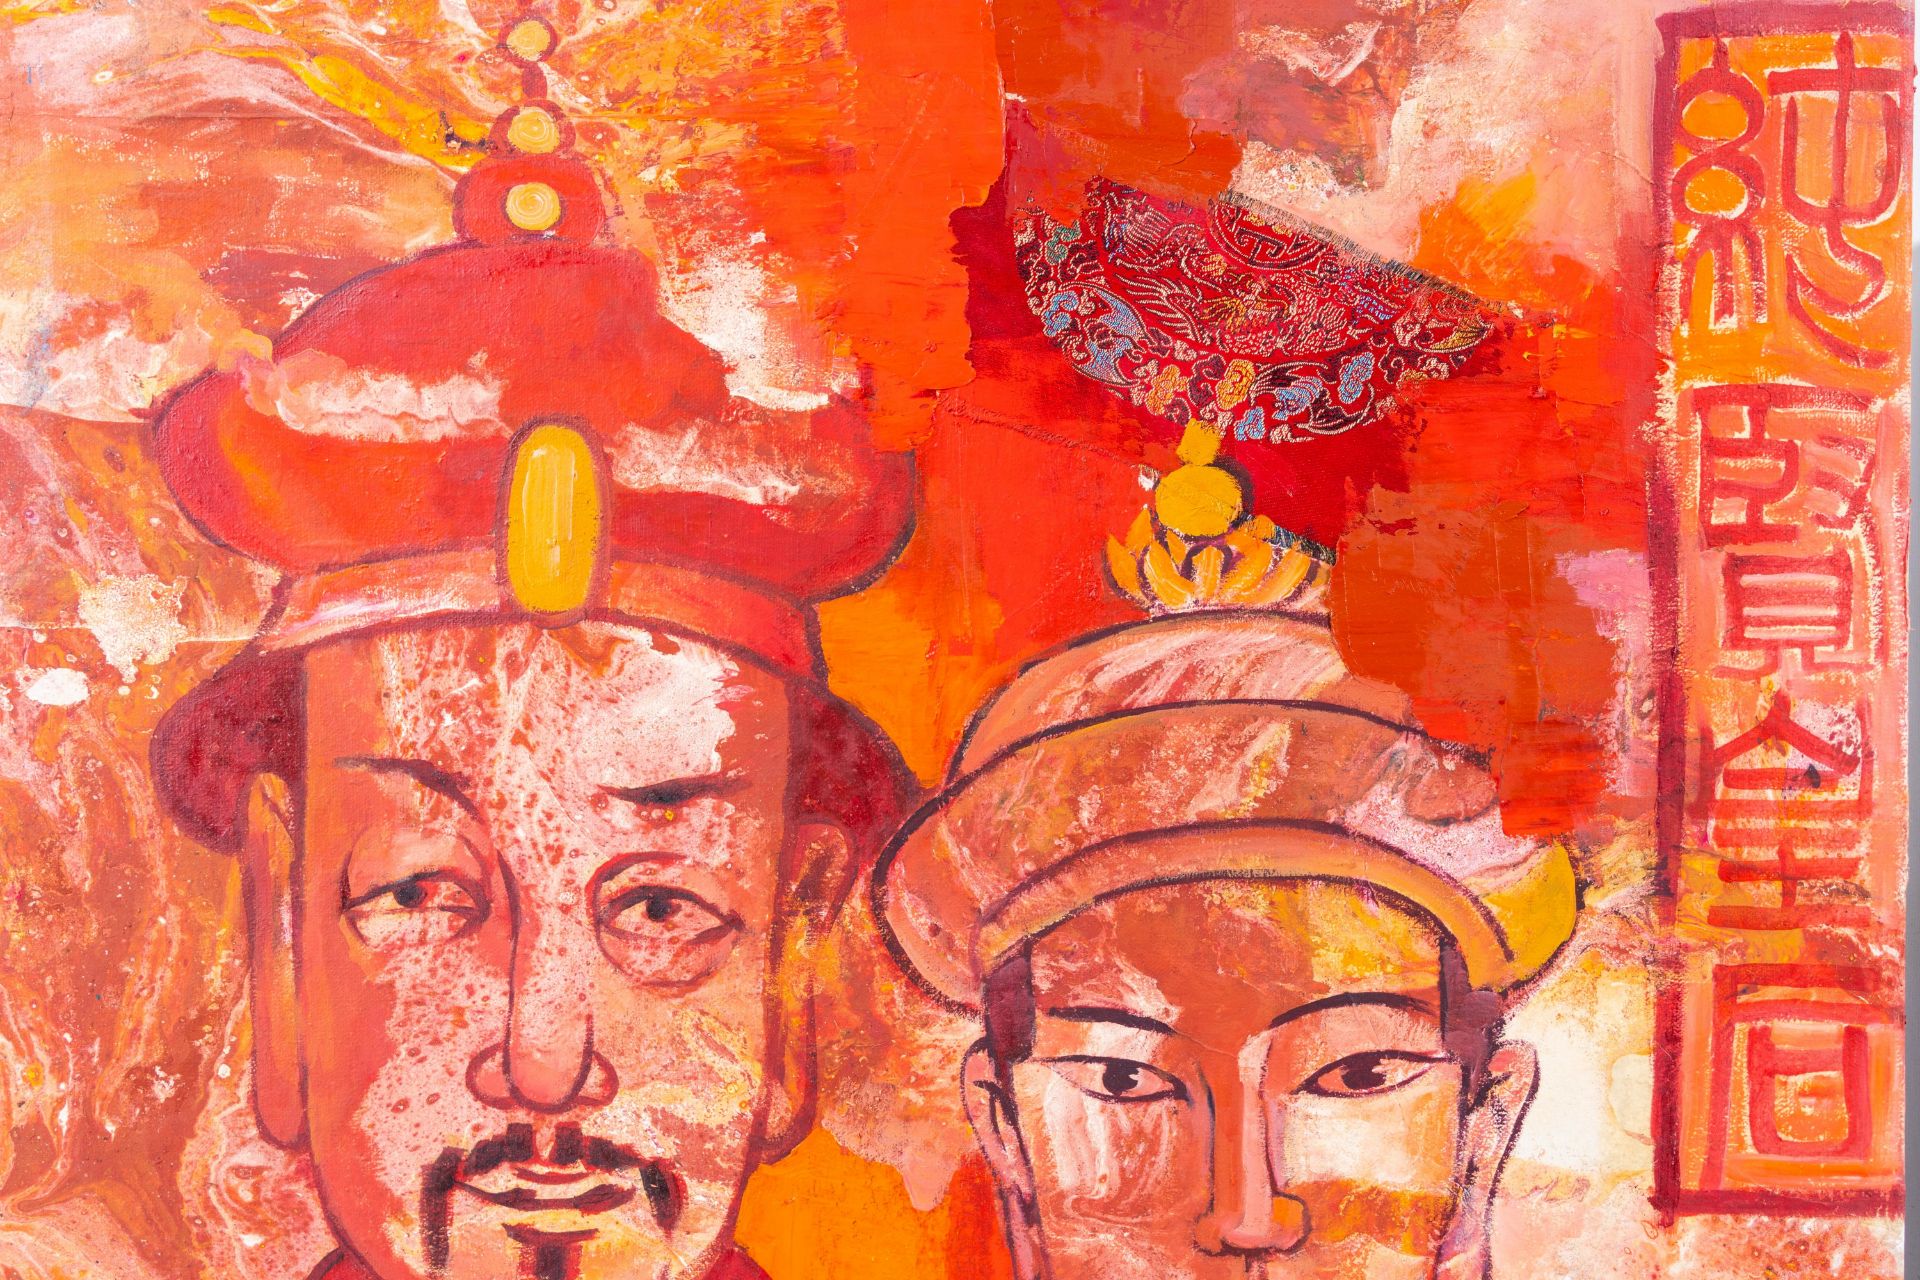 Wei Shen (1966): 'Emperor and Empress' and Dancing ladies, mixed media, dated 2005 - Image 5 of 10